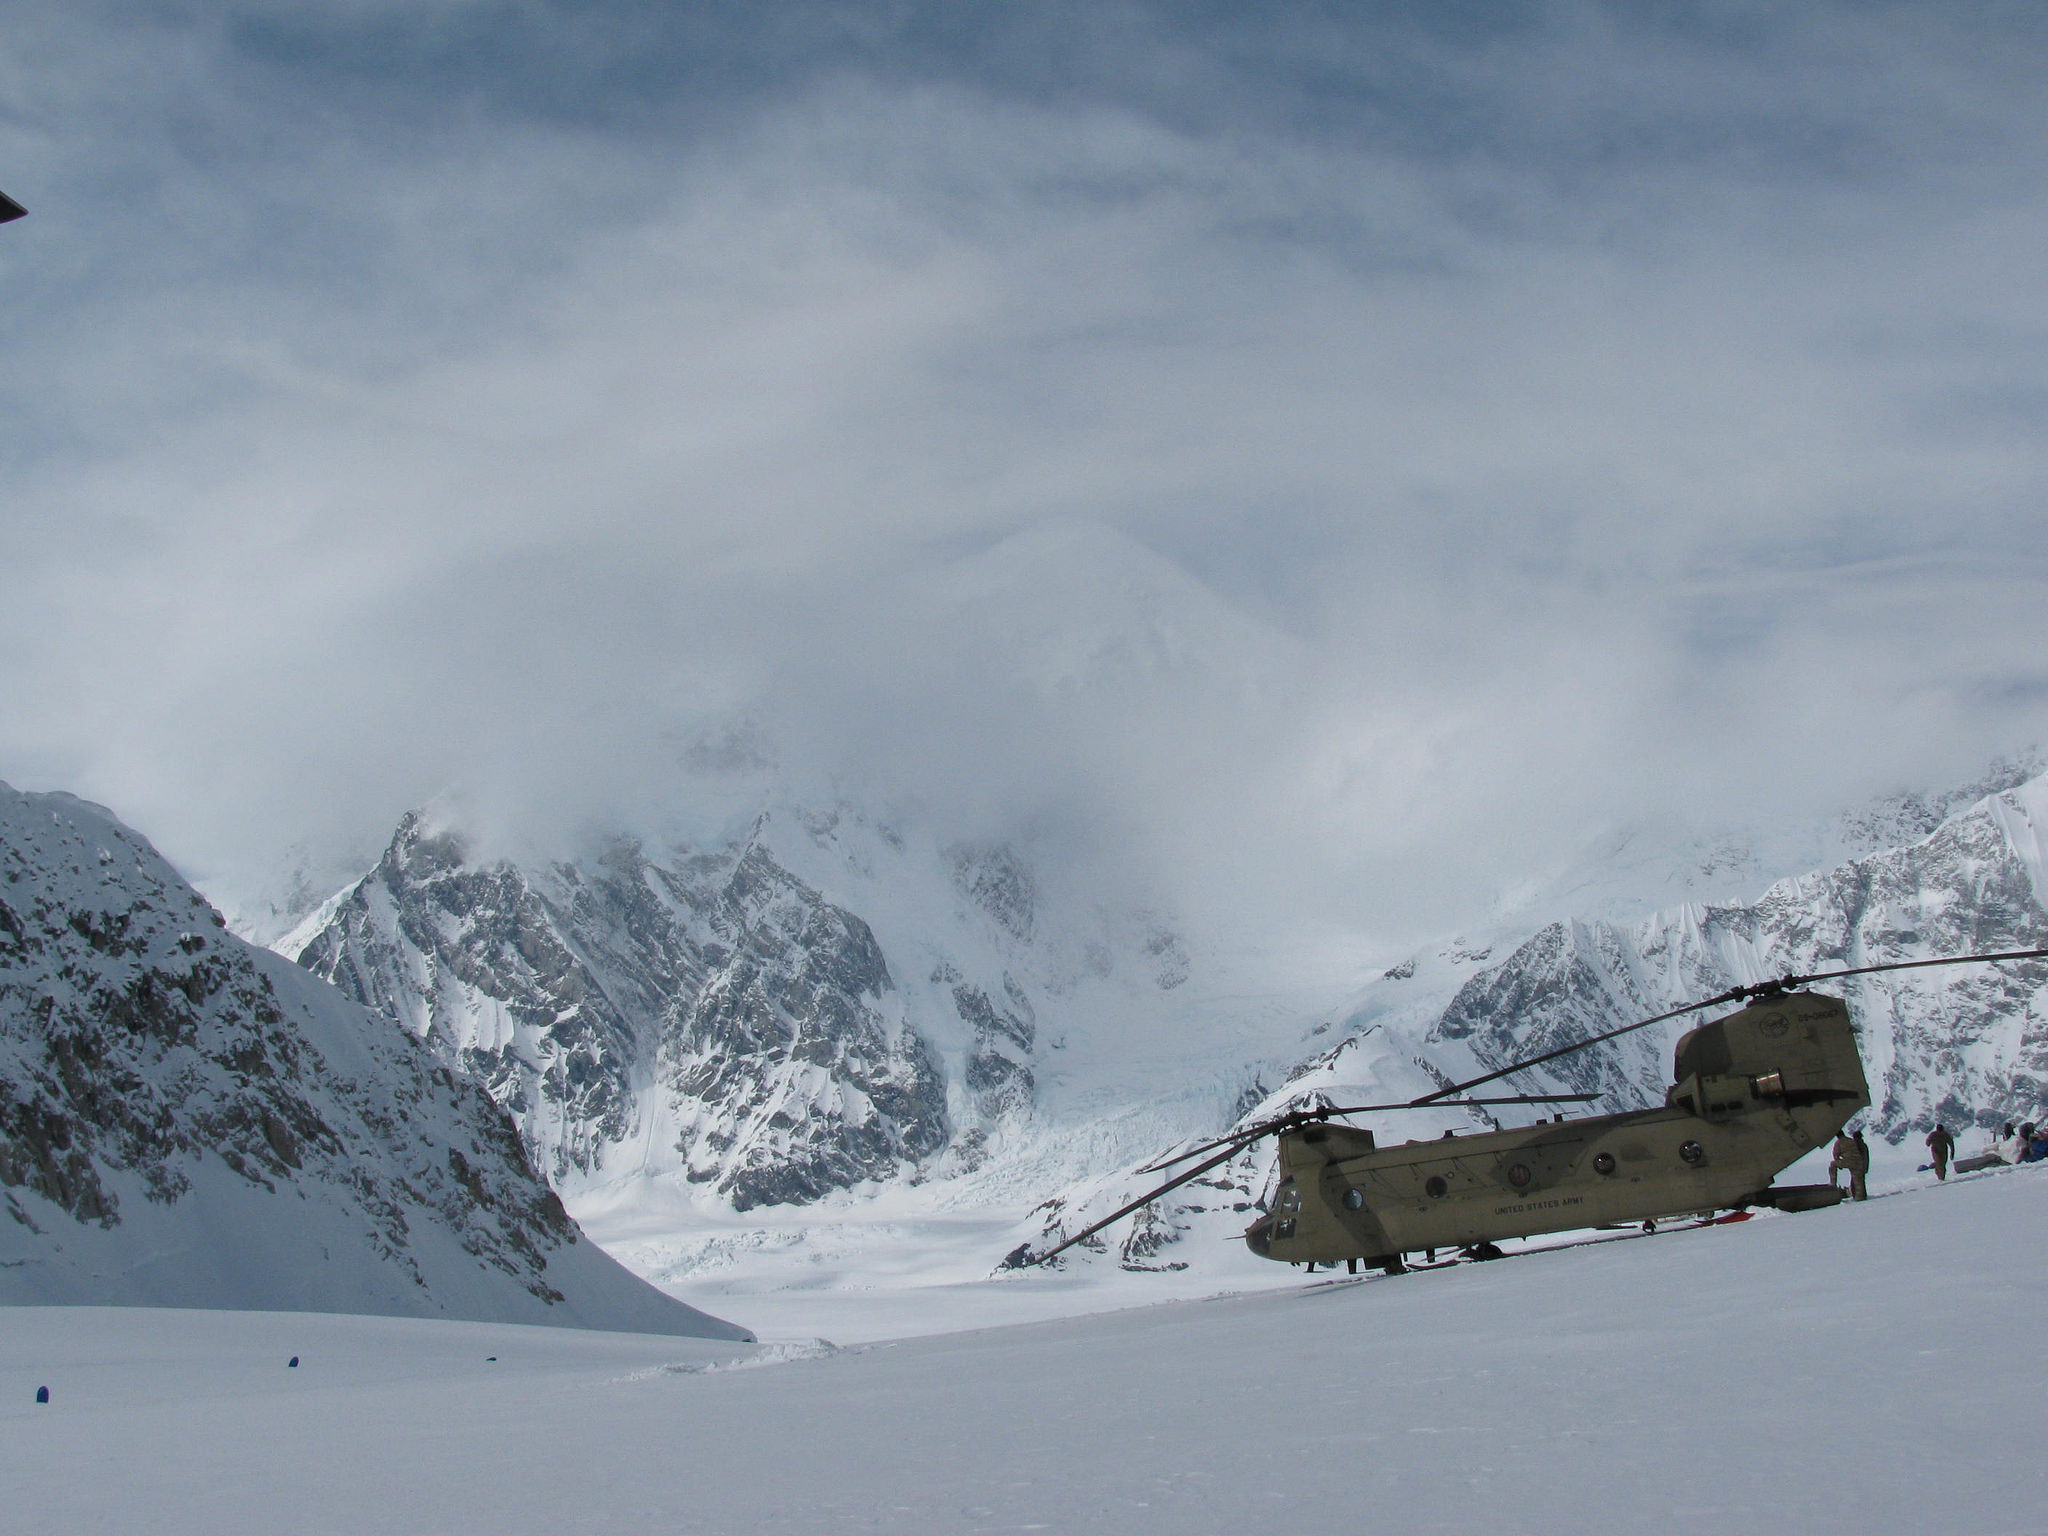 A CH-47 lands on the Kahiltna Glacier, surrounded by snowy peaks